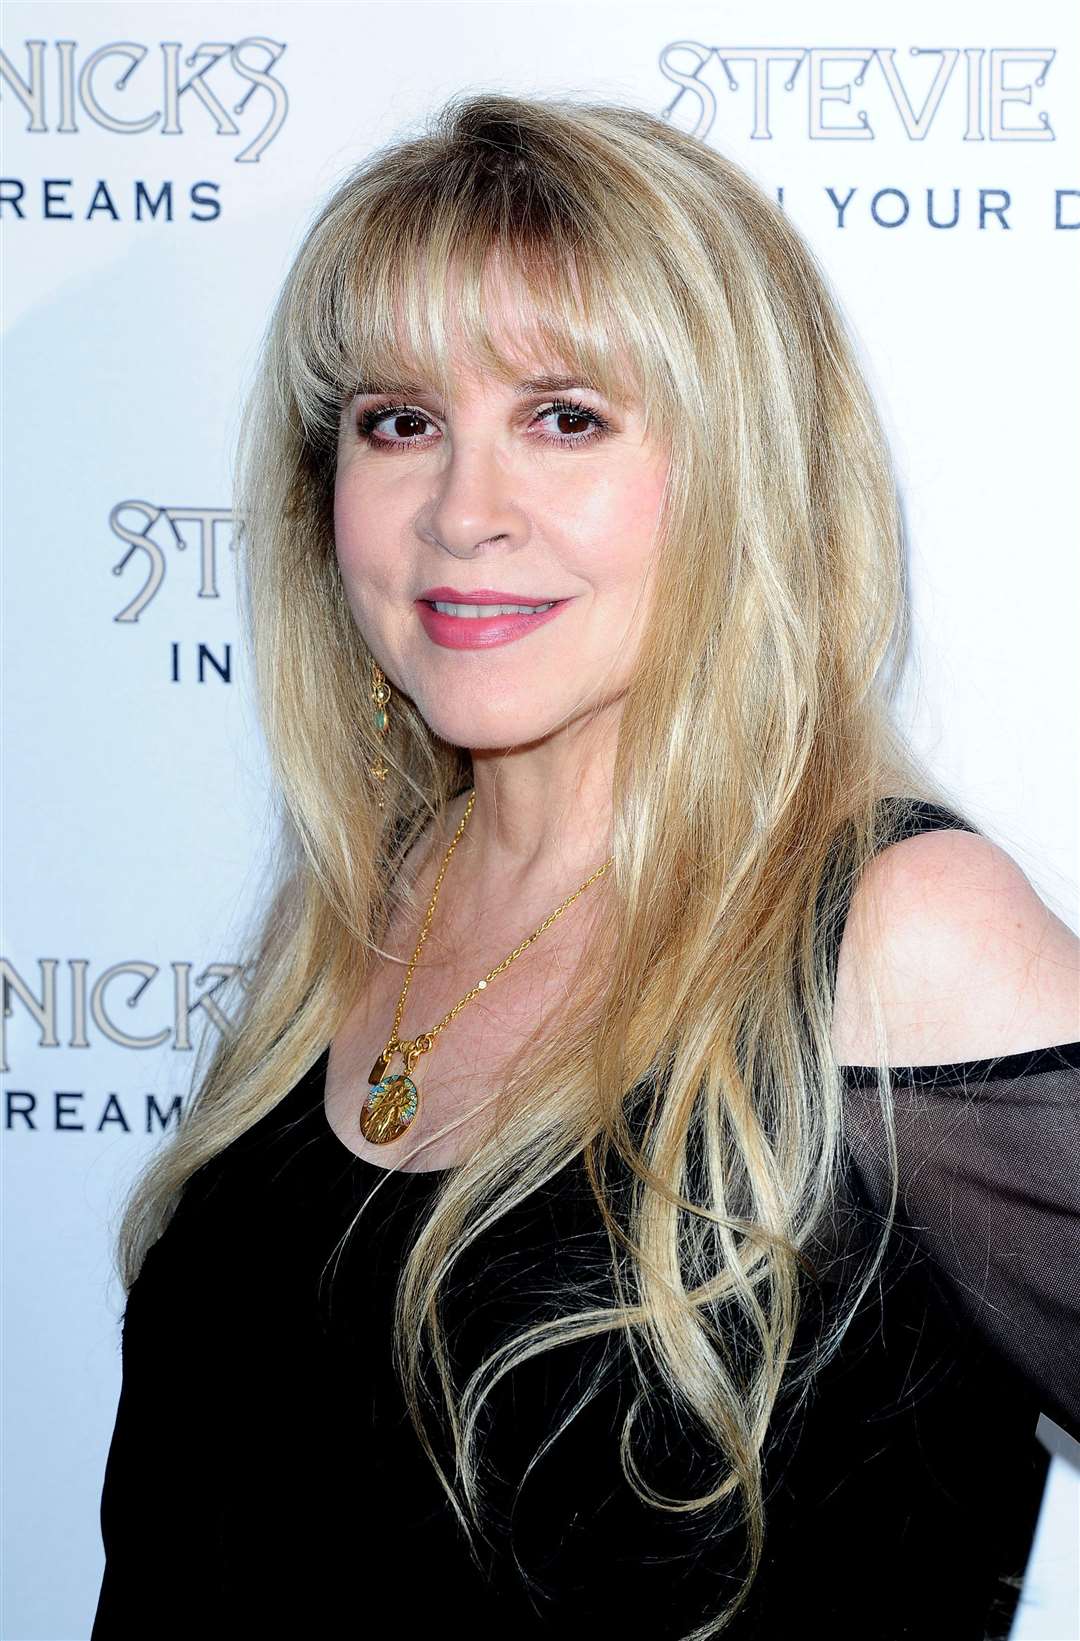 Stevie Nicks said the sense of loss she feels is akin to when her mother died (Ian West/PA)